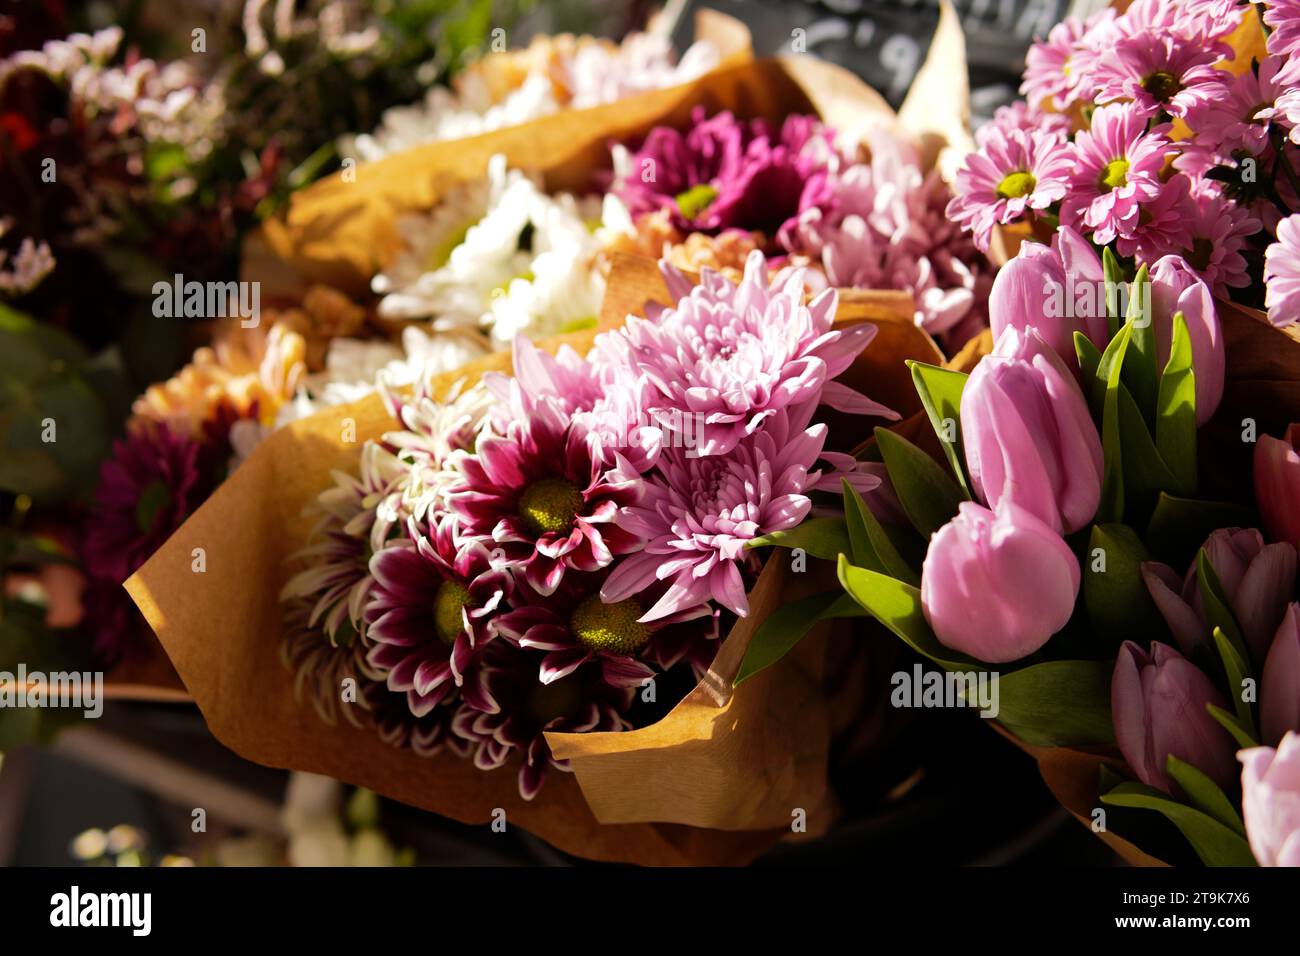 detail of flowers in a shop window with natural light Stock Photo